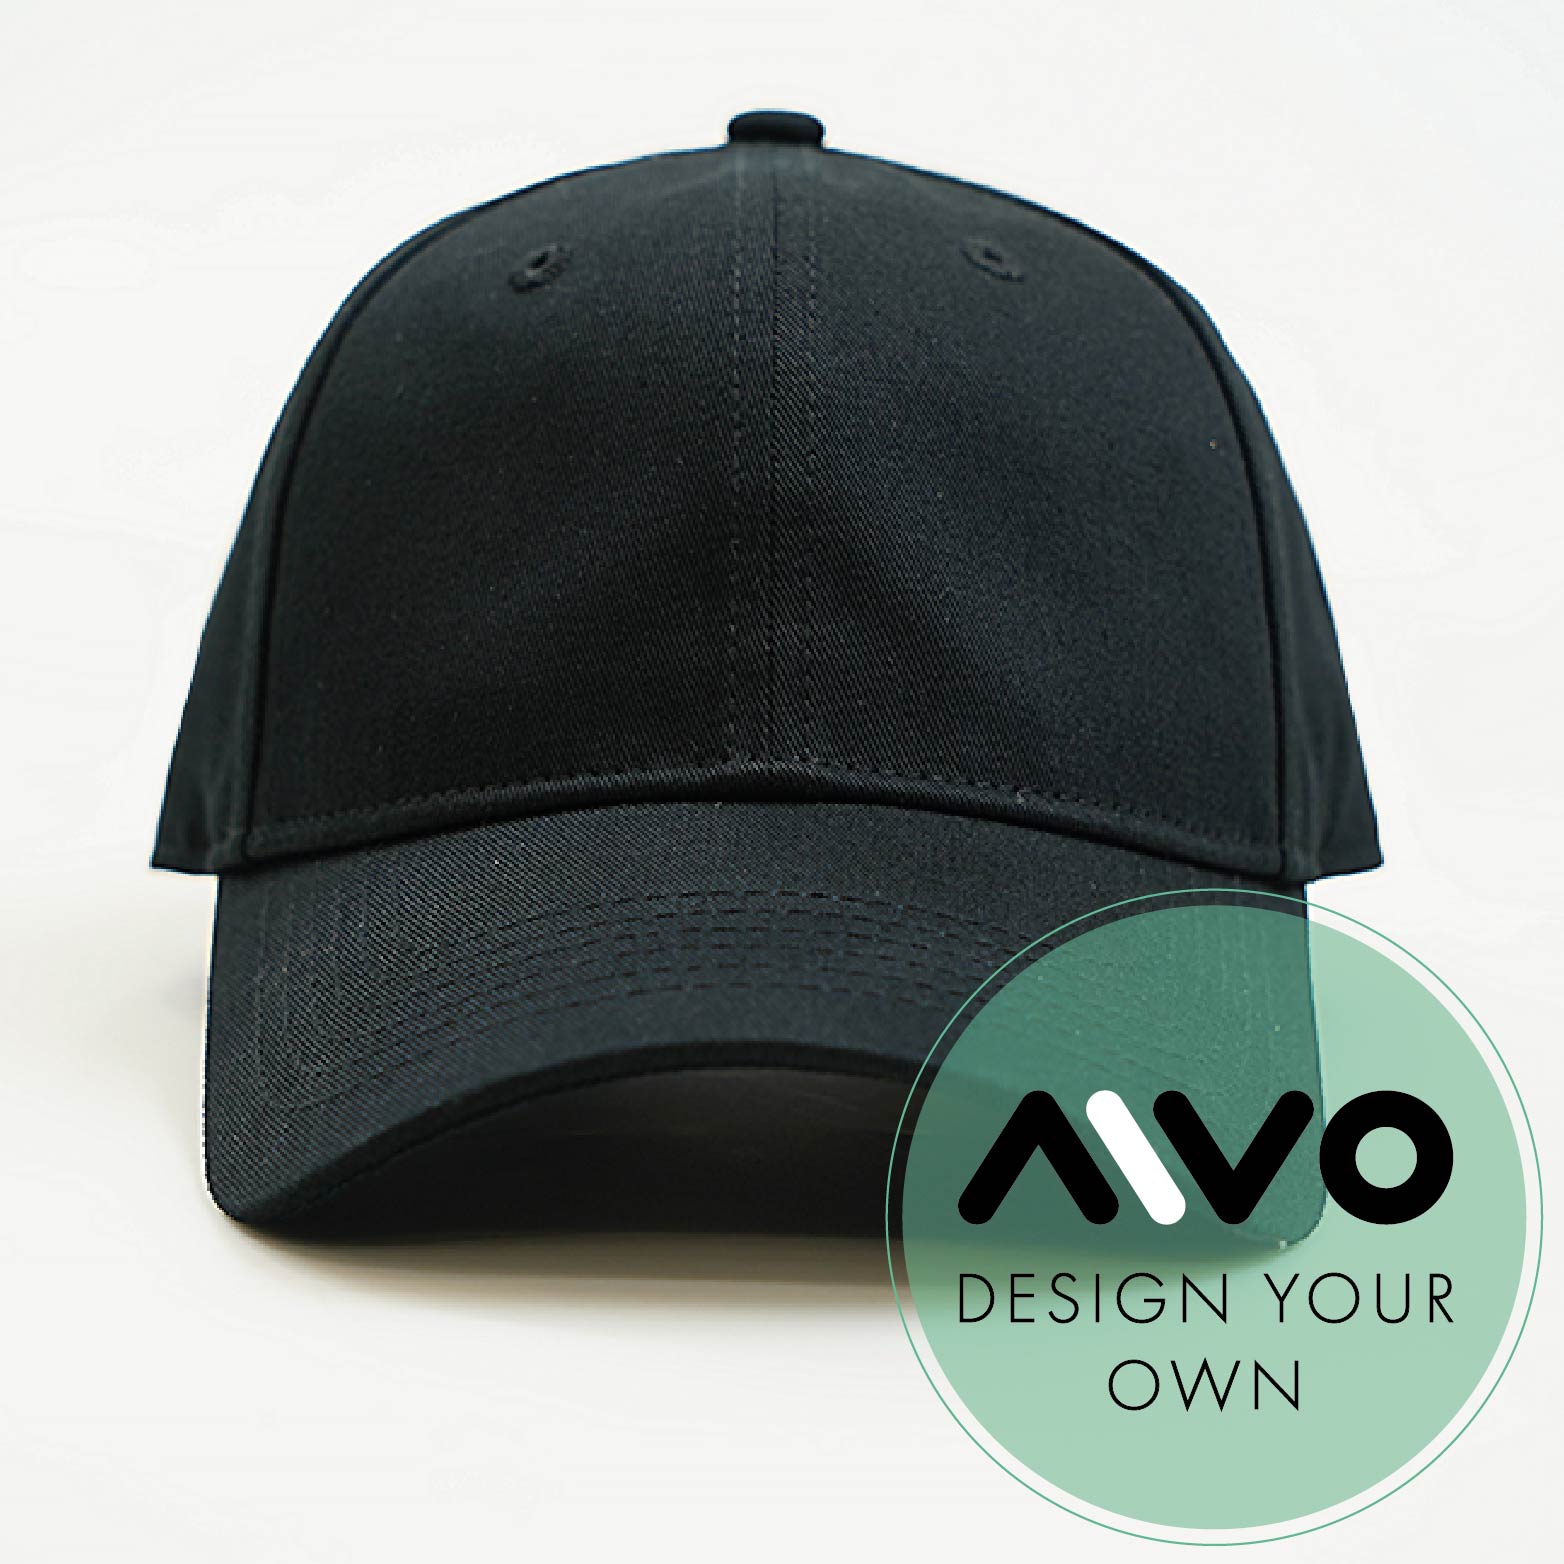 Baseball Cap - Unstructured Shape design your own and add your own logo - black